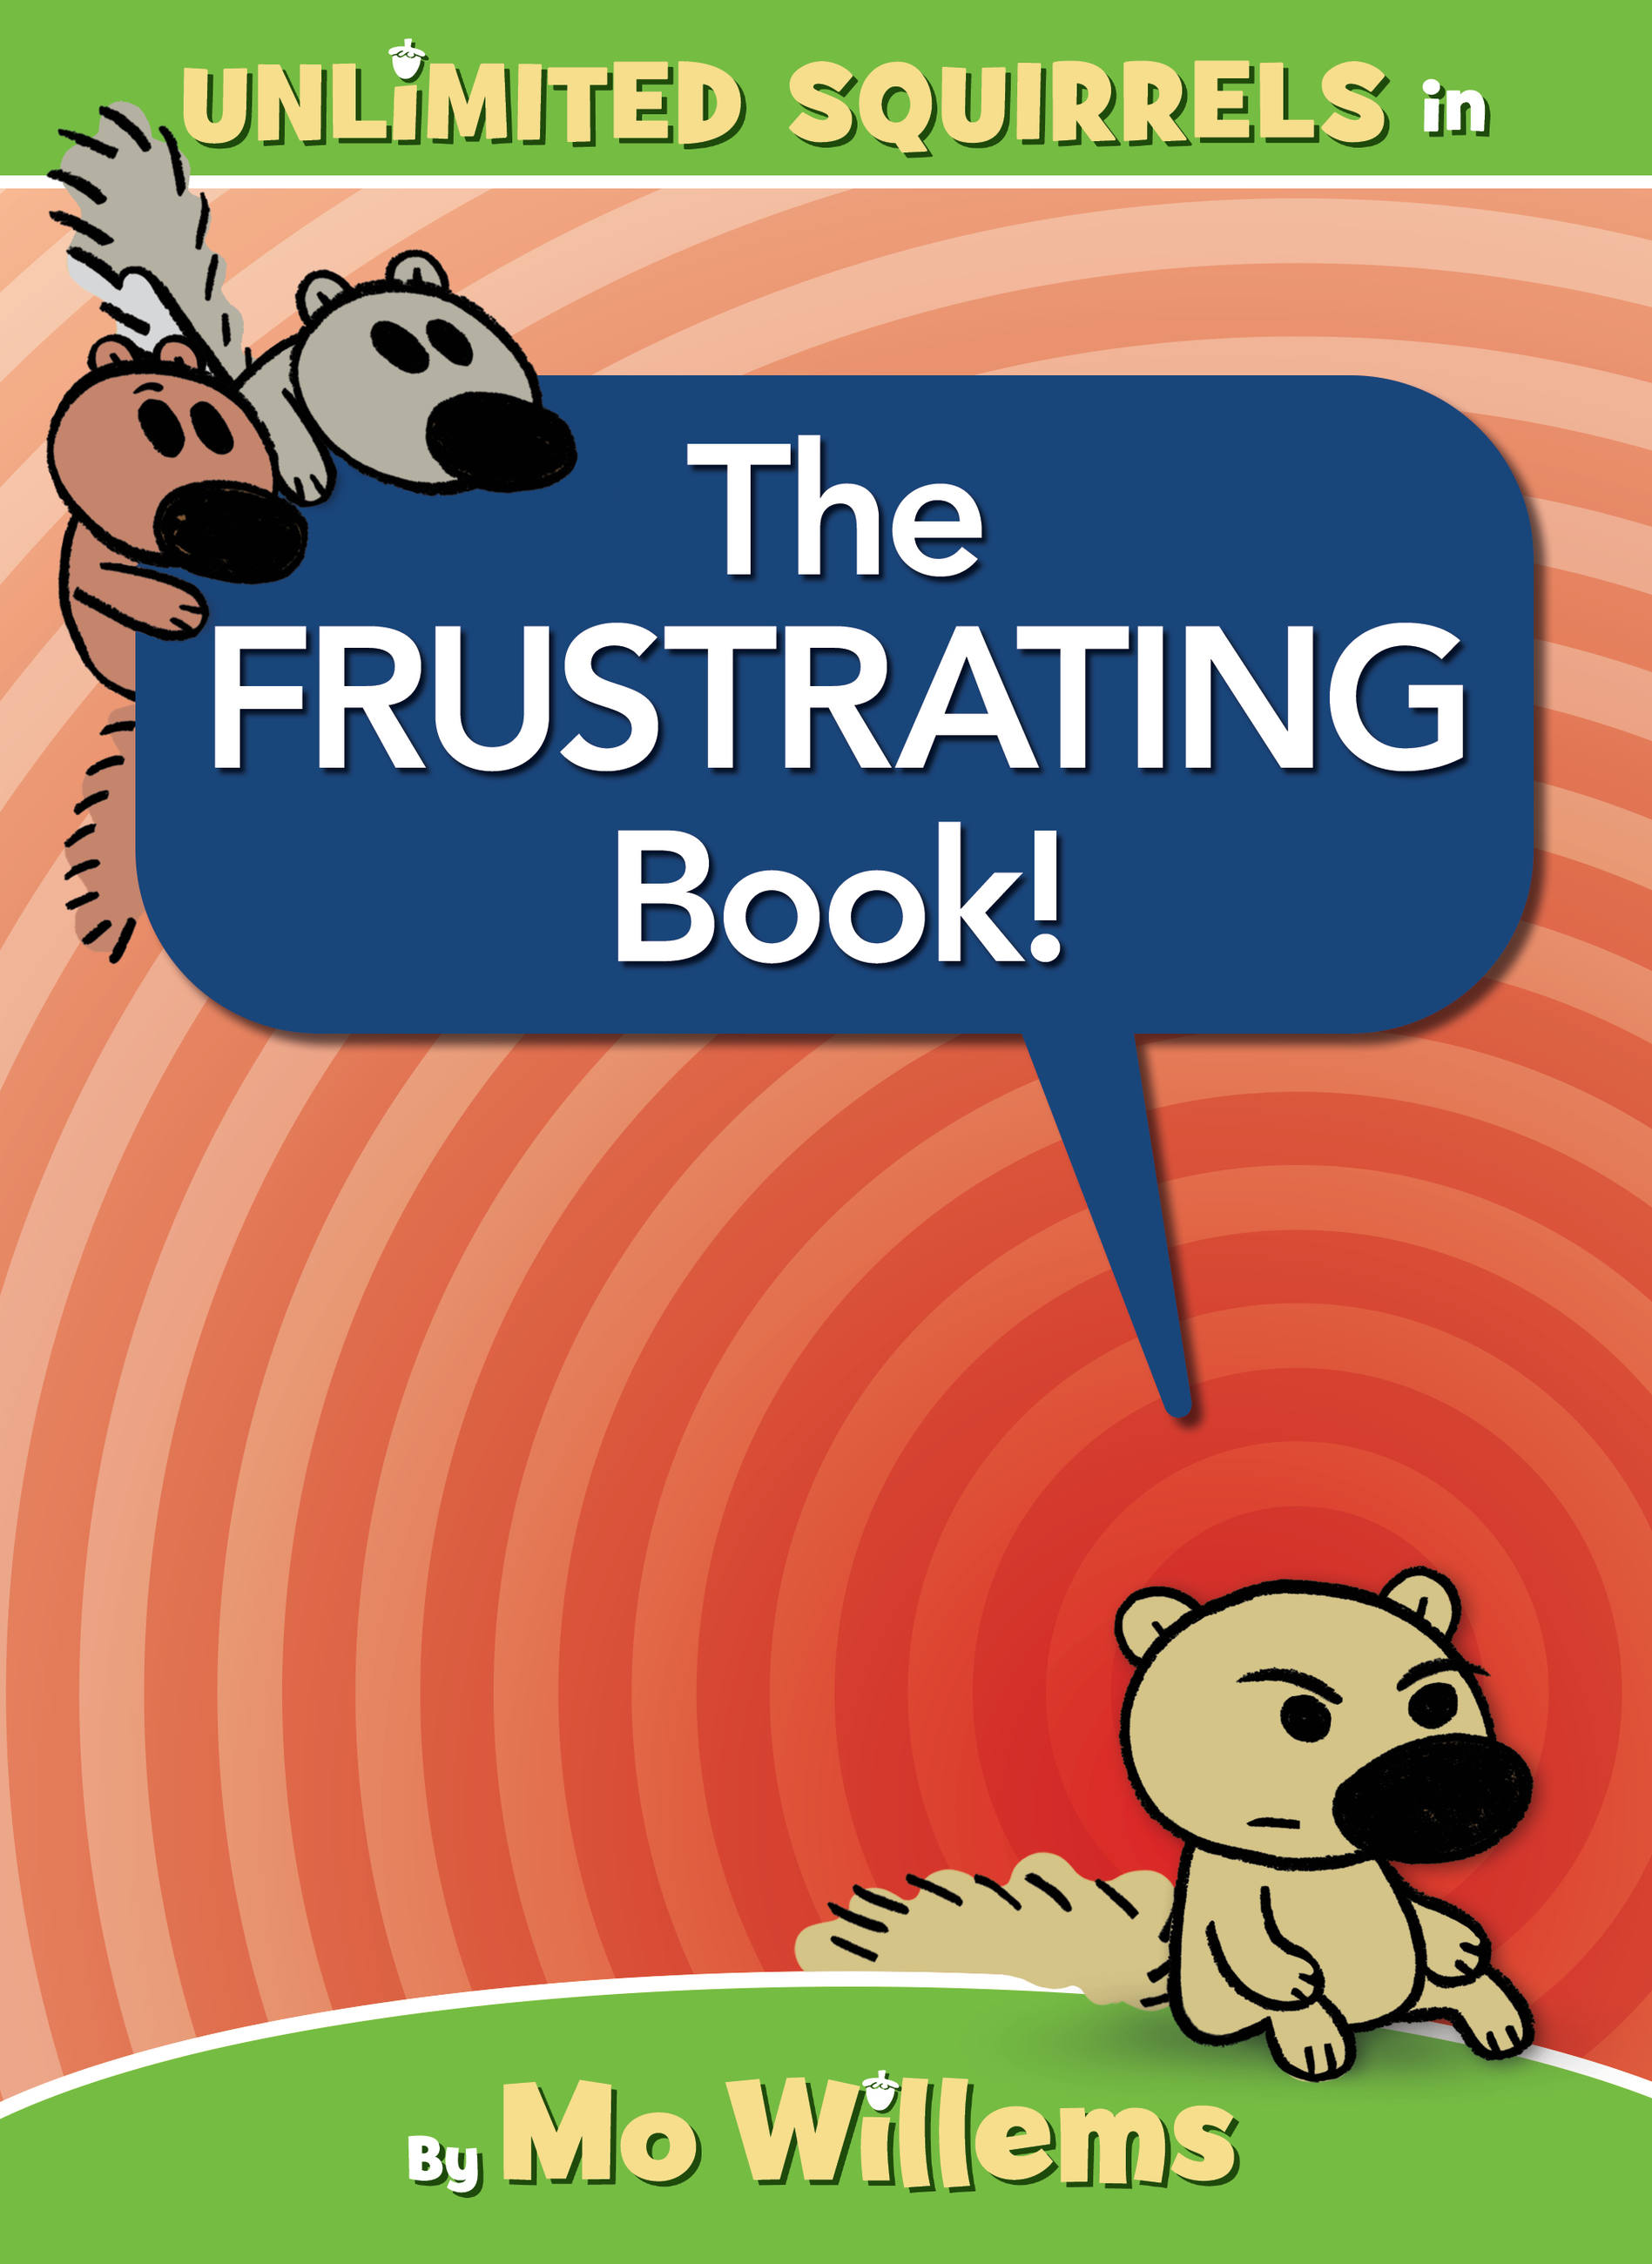 The FRUSTRATING Book! (An Unlimited Squirrels Book) | Willems, Mo